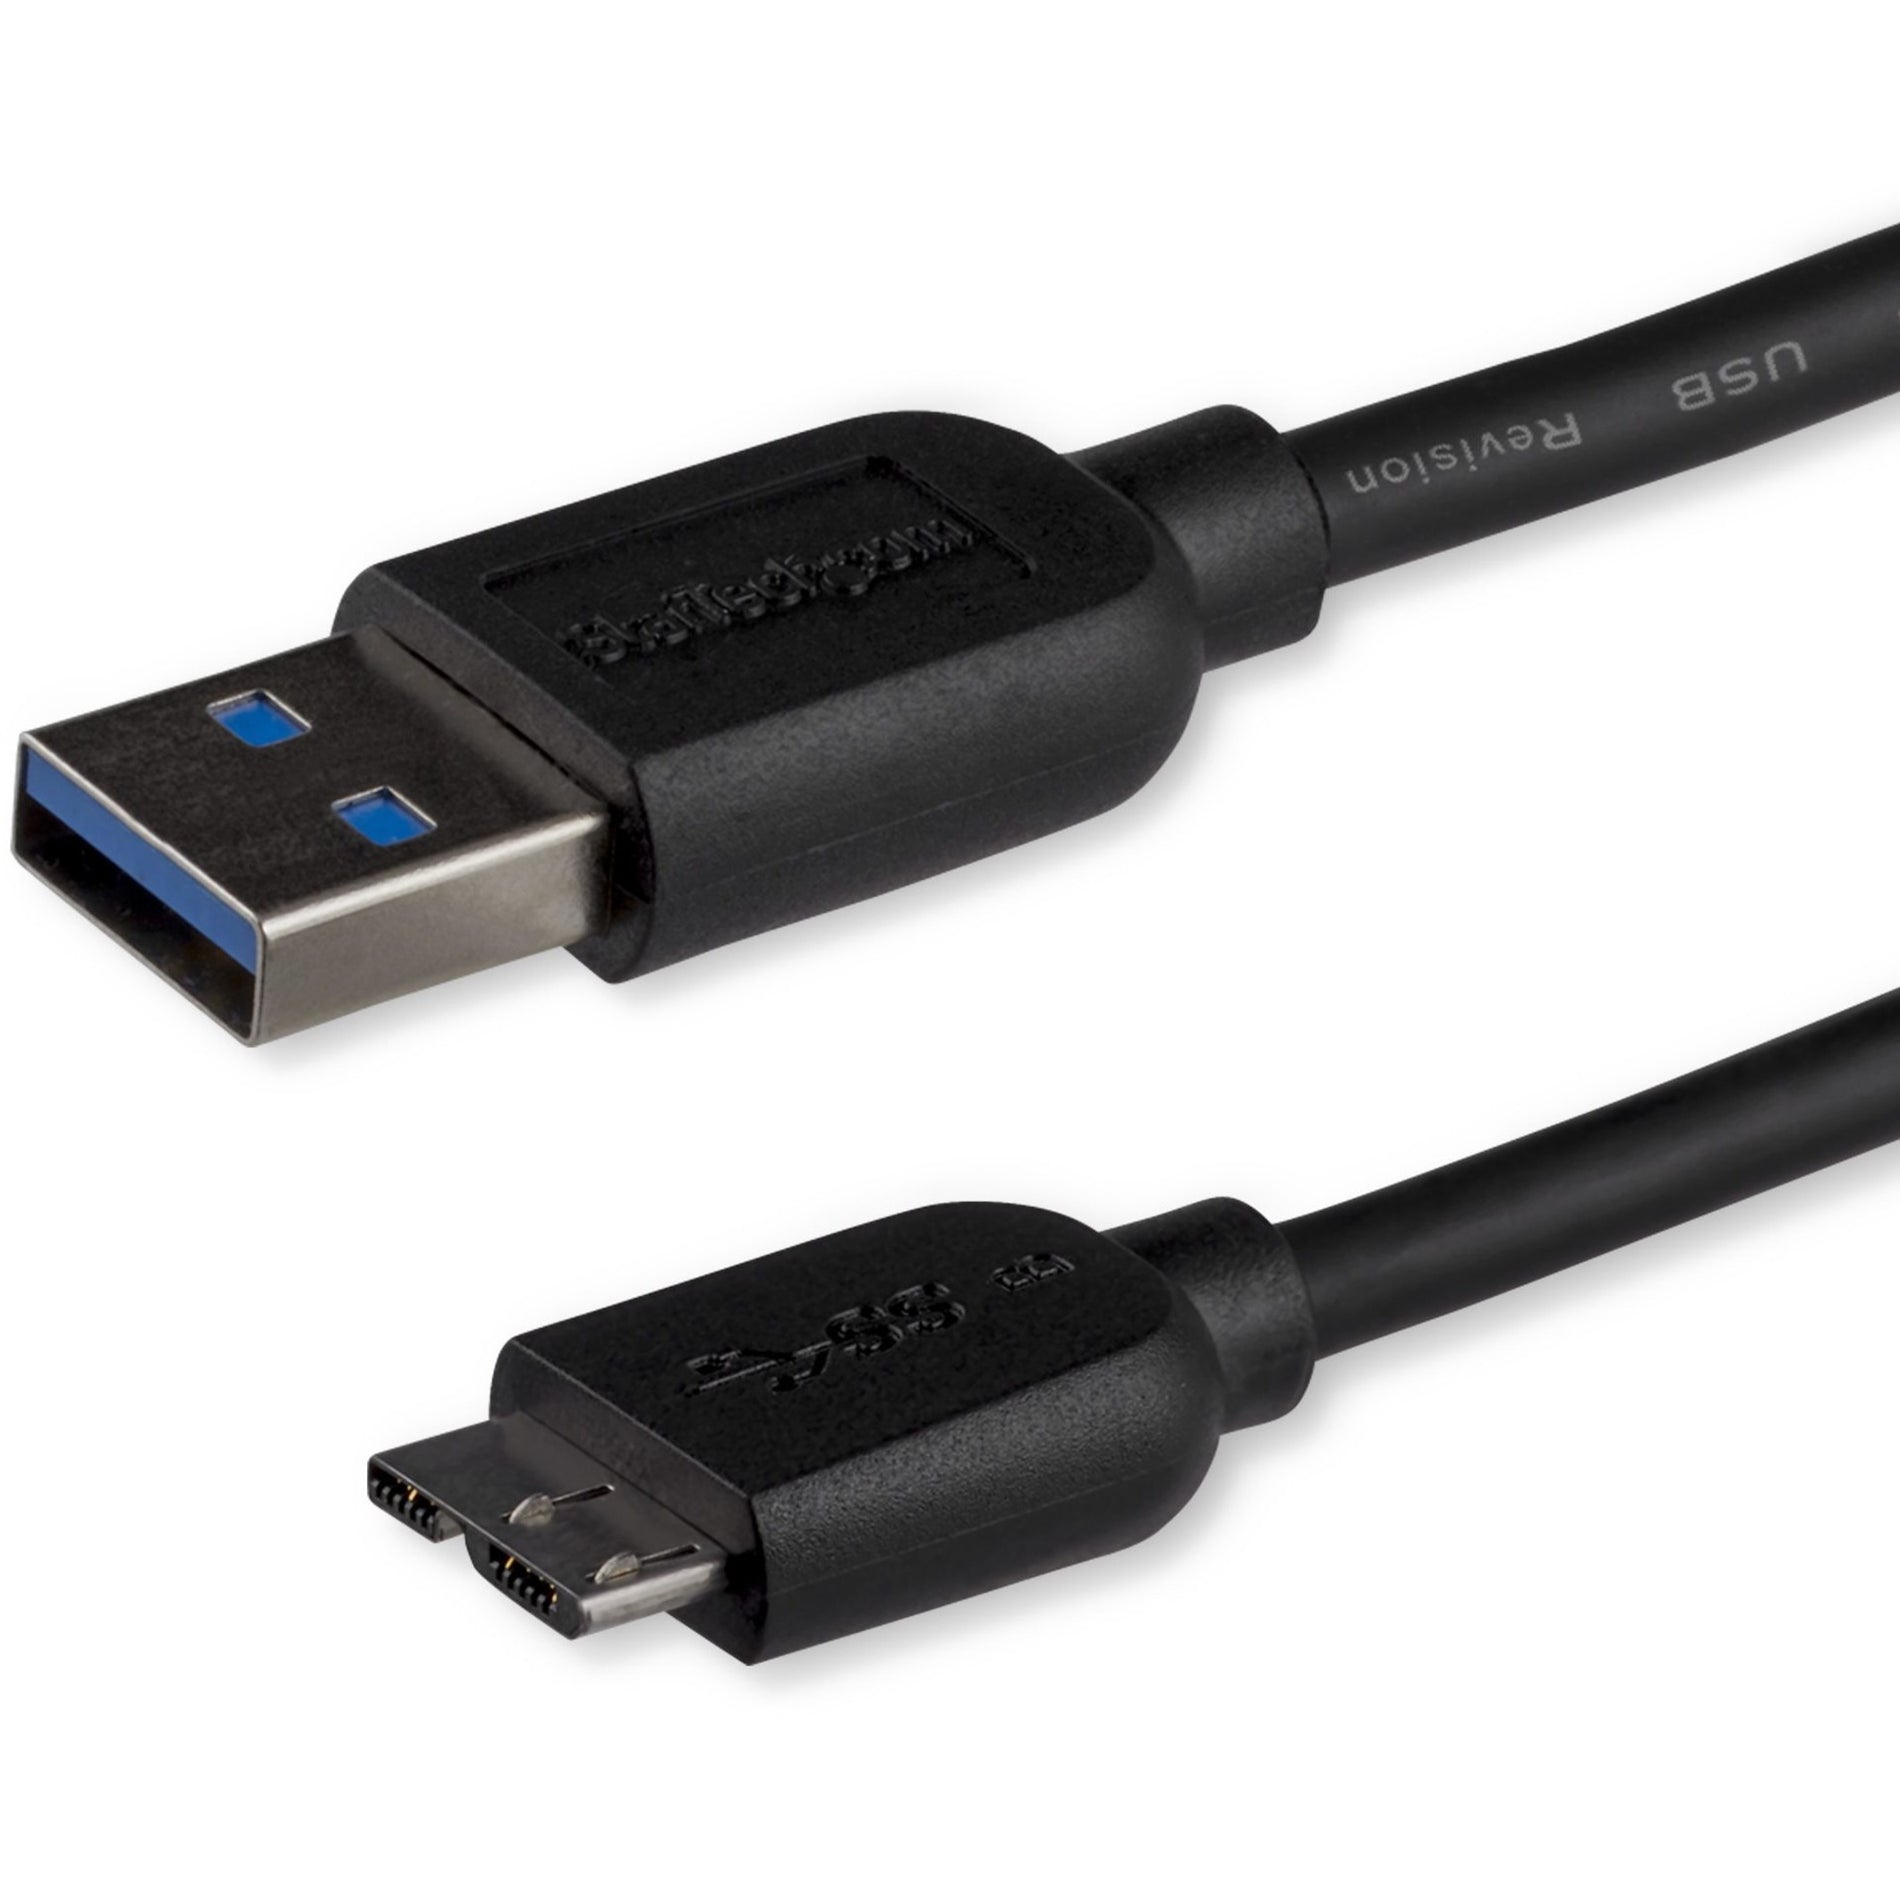 StarTech.com USB3AUB3MS 3m (10ft) Slim SuperSpeed USB 3.0 A to Micro B Cable - M/M, Fast Data Transfer, Flexible and Durable